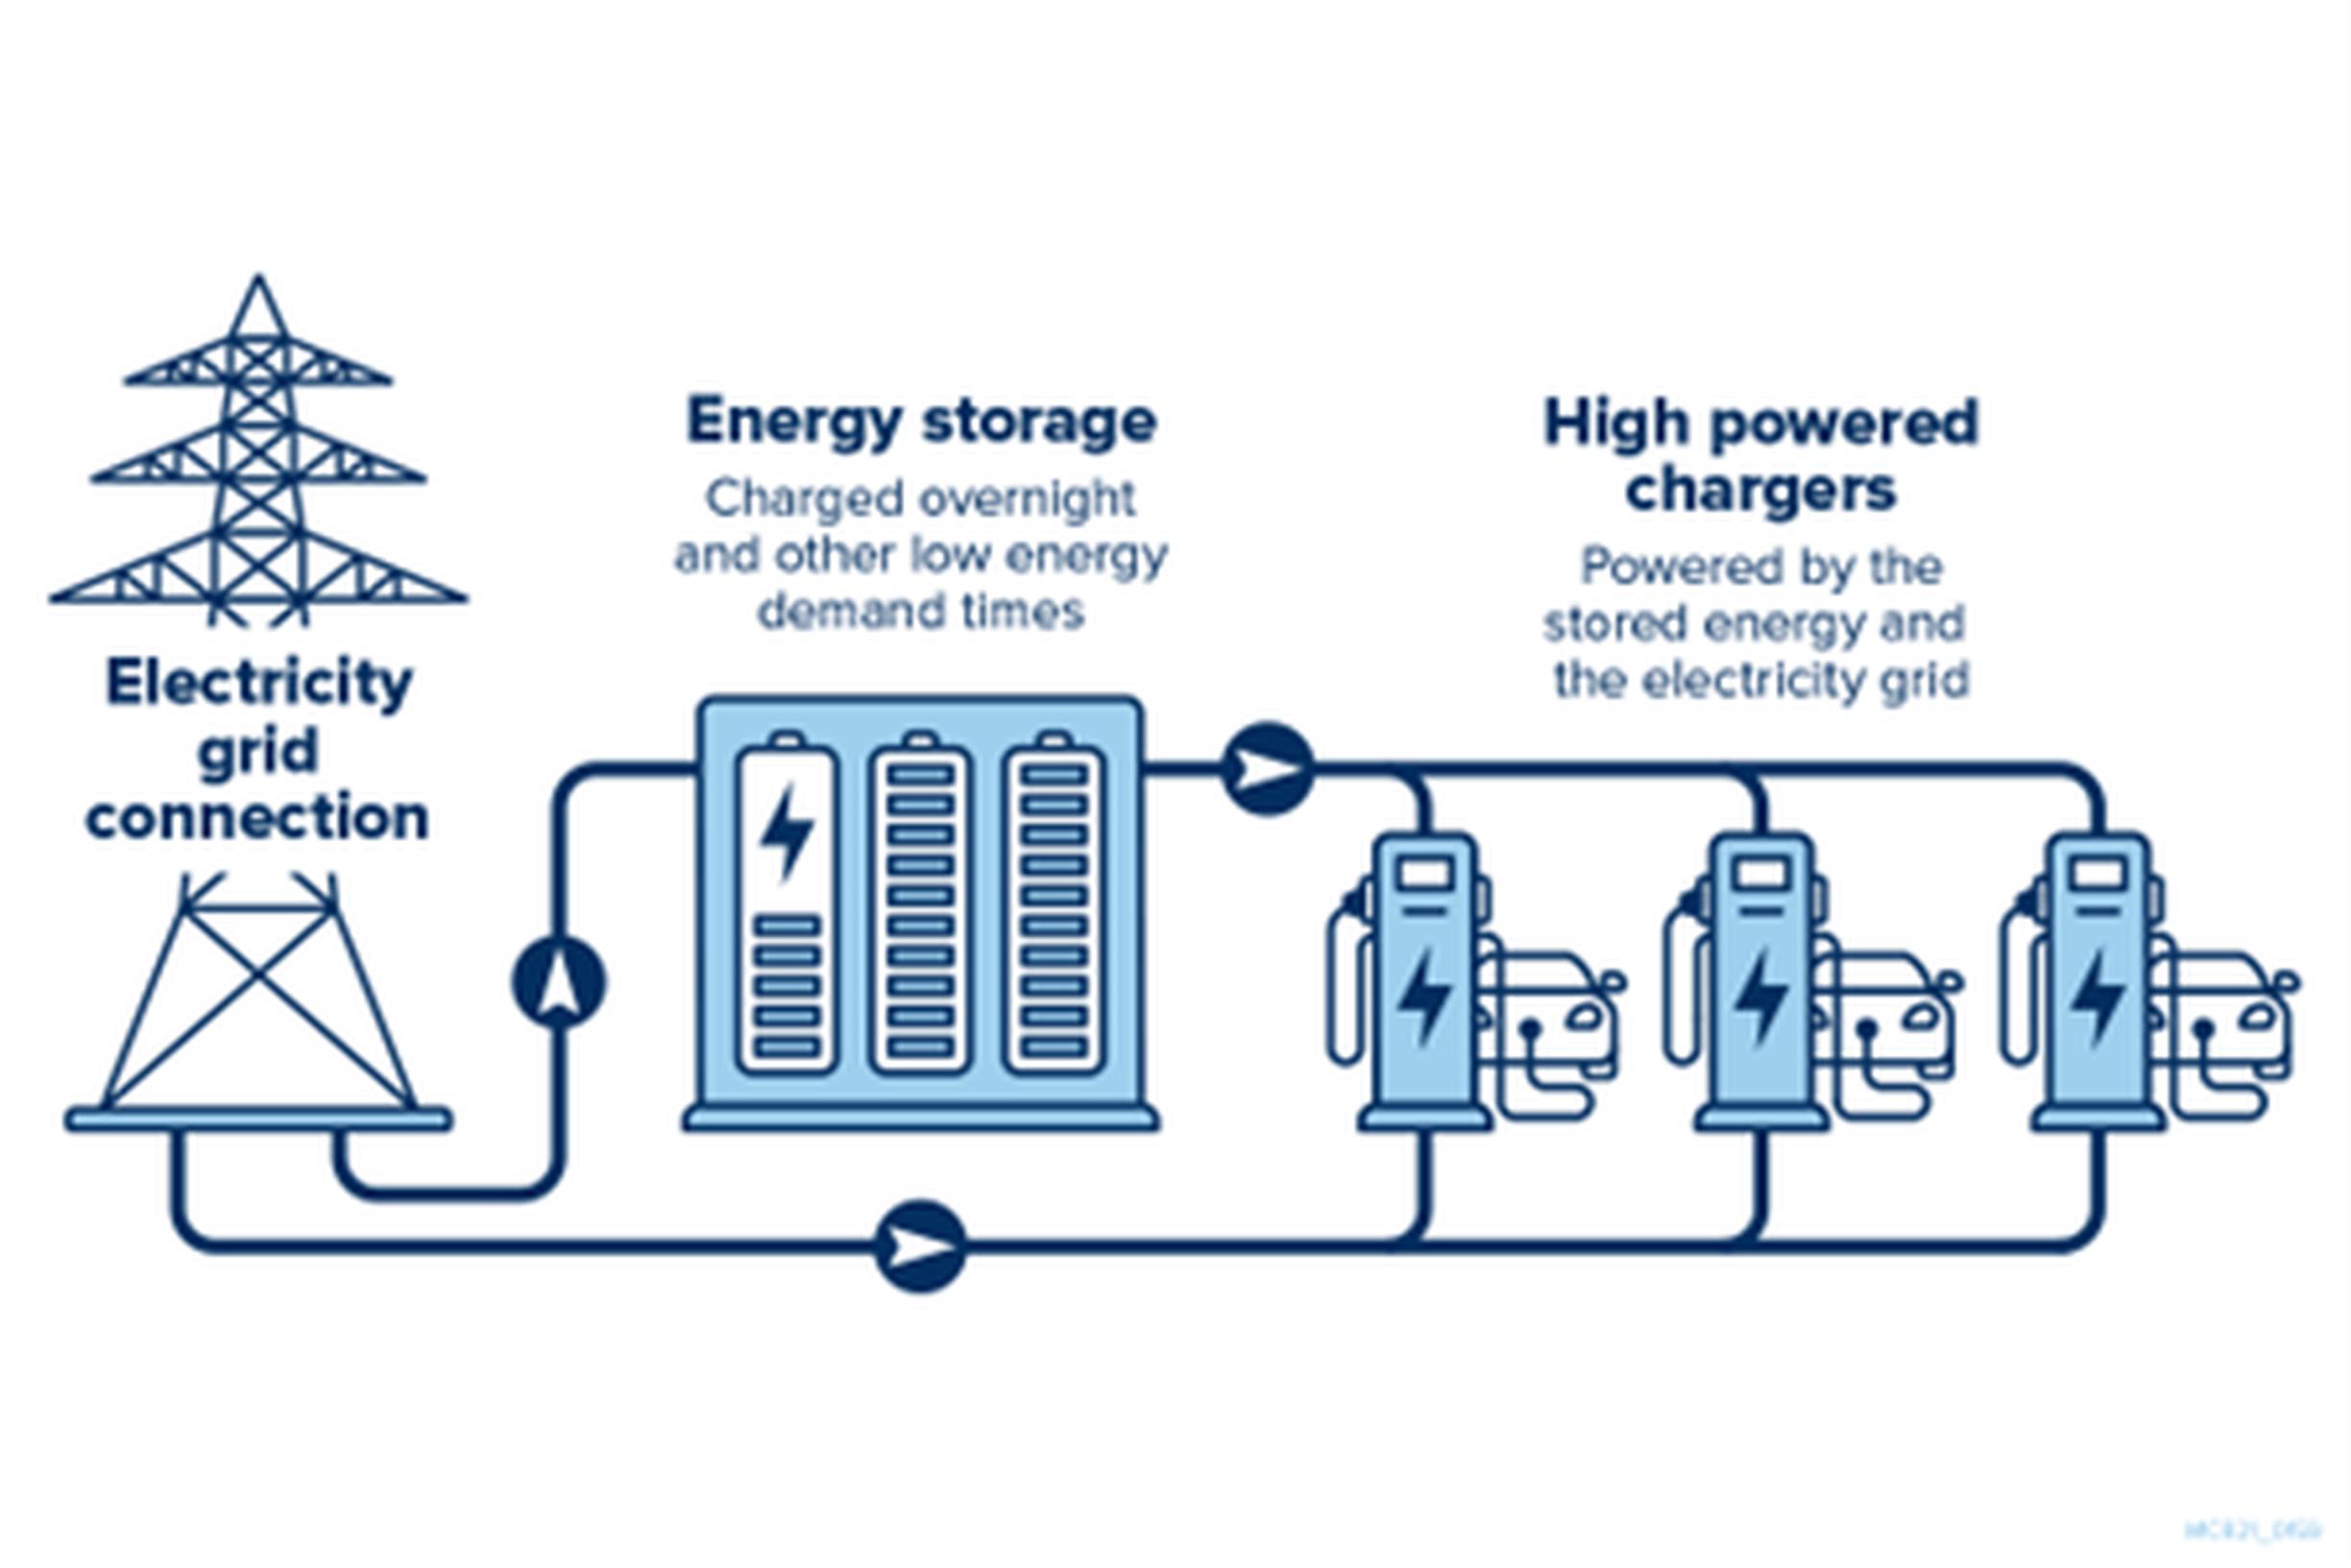 National Highways has awarded the £8m energy storage systems contract to Ameresco, who will upgrade seven motorway service areas